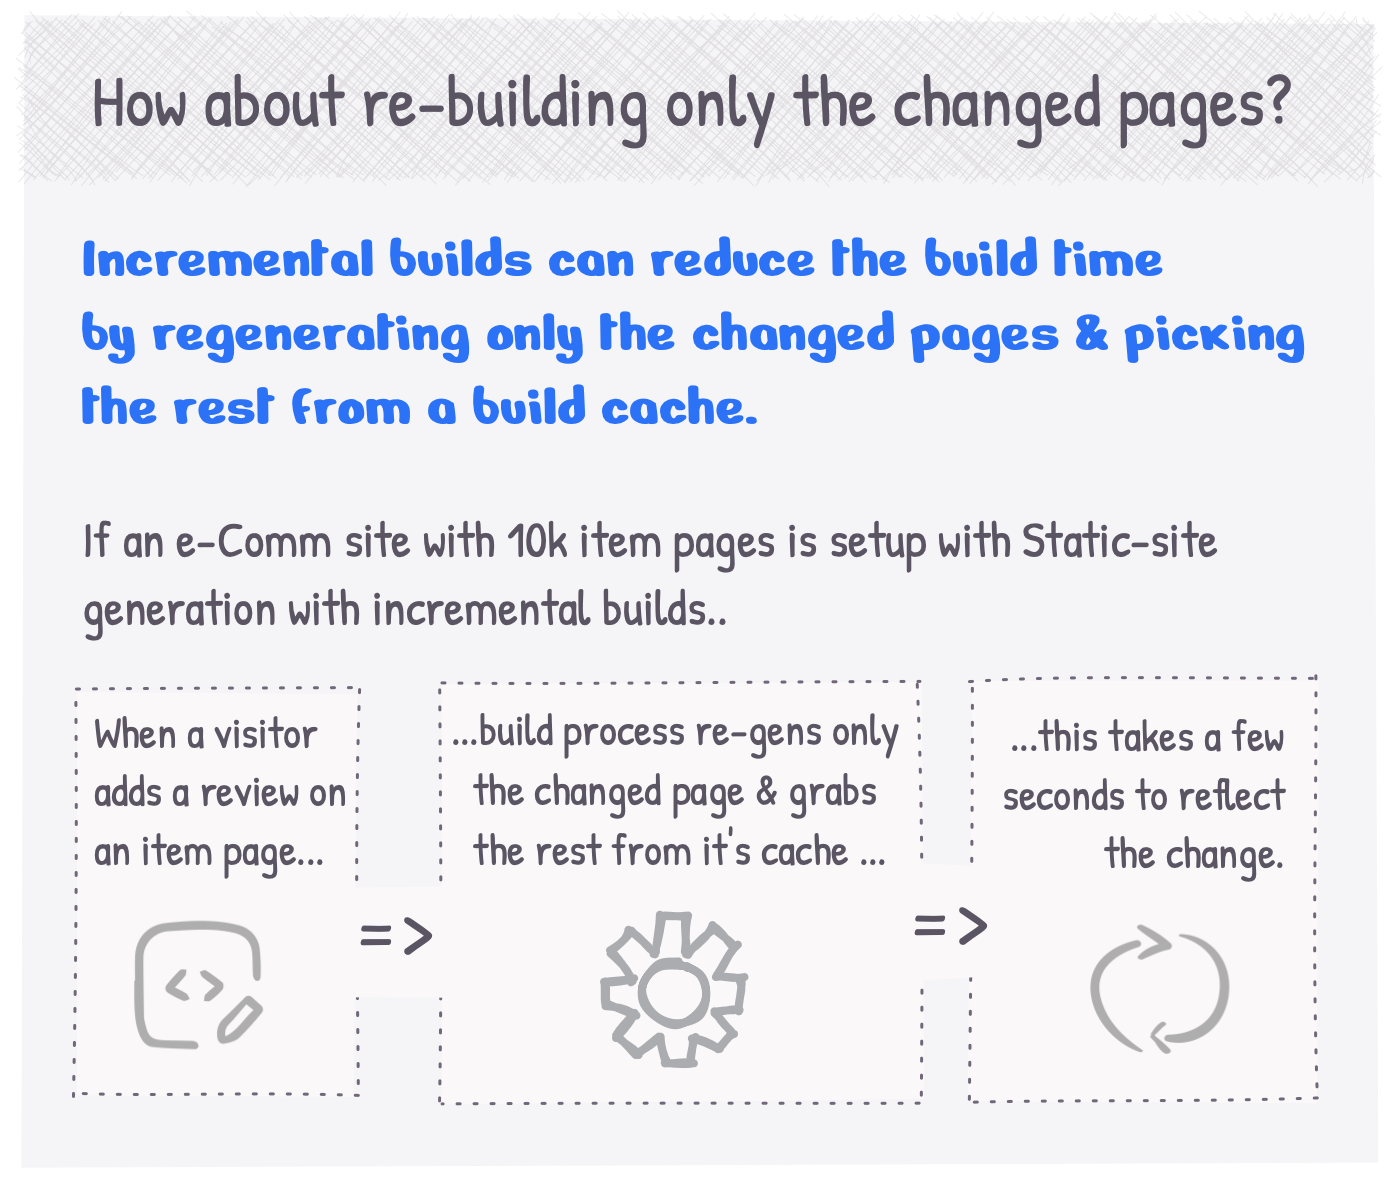 How about re-building only the changed pages?